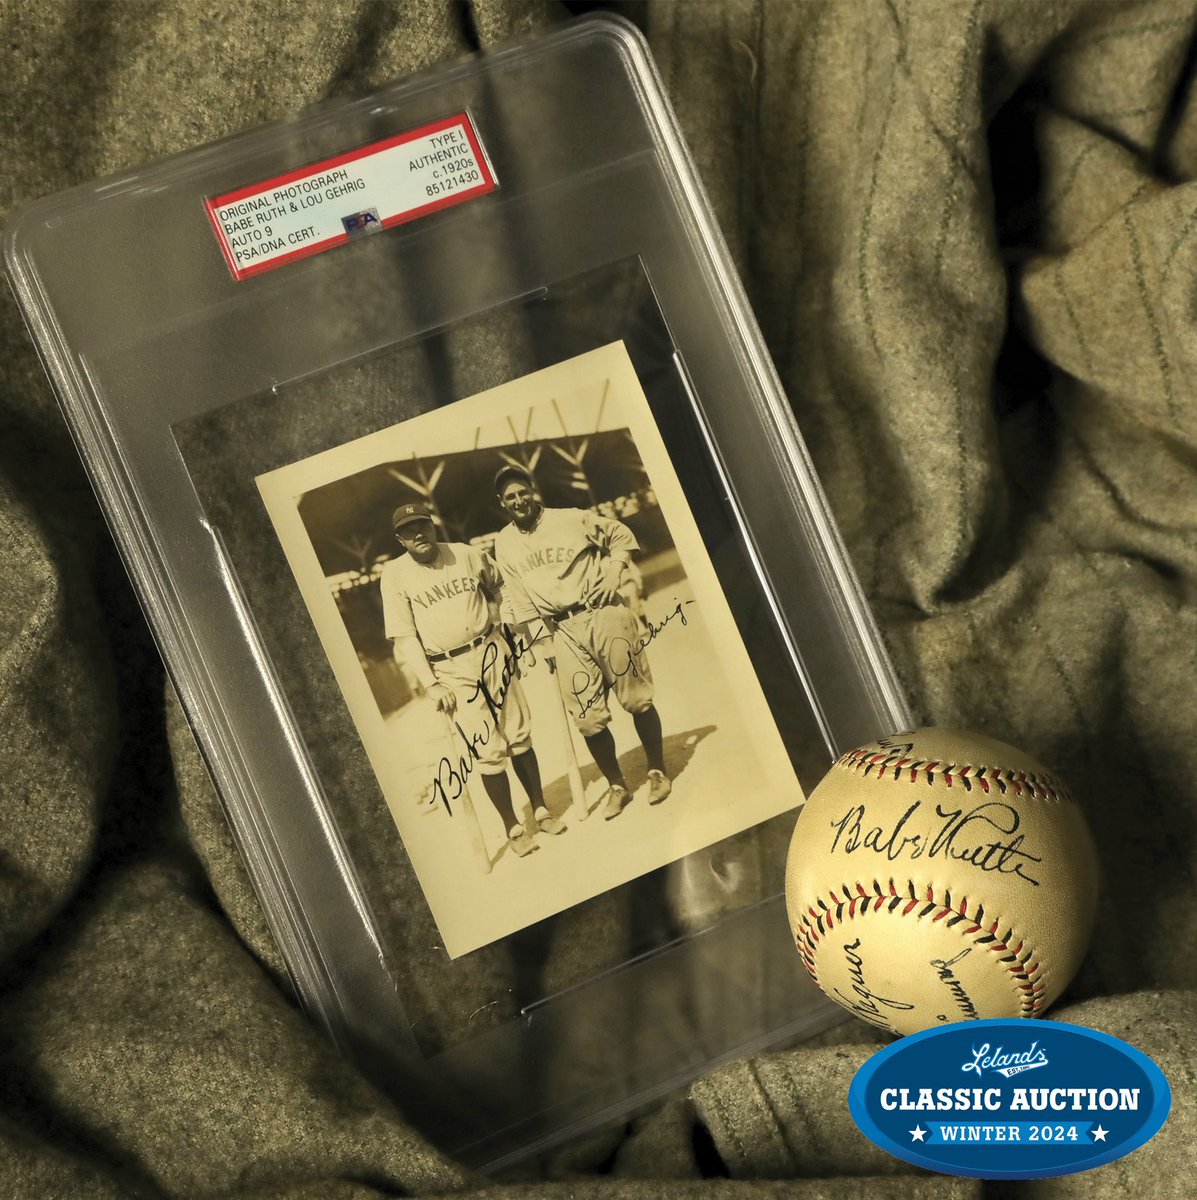 The Bambino's Legacy Lives On! Indulge in the sweet nostalgia of baseball's greatest legend, Babe Ruth. The Classic features an array of important Bambino memorabilia for you to view, bid on, and add to your collection. Closes Mar 16th at 10 PM ET.  lelands.com